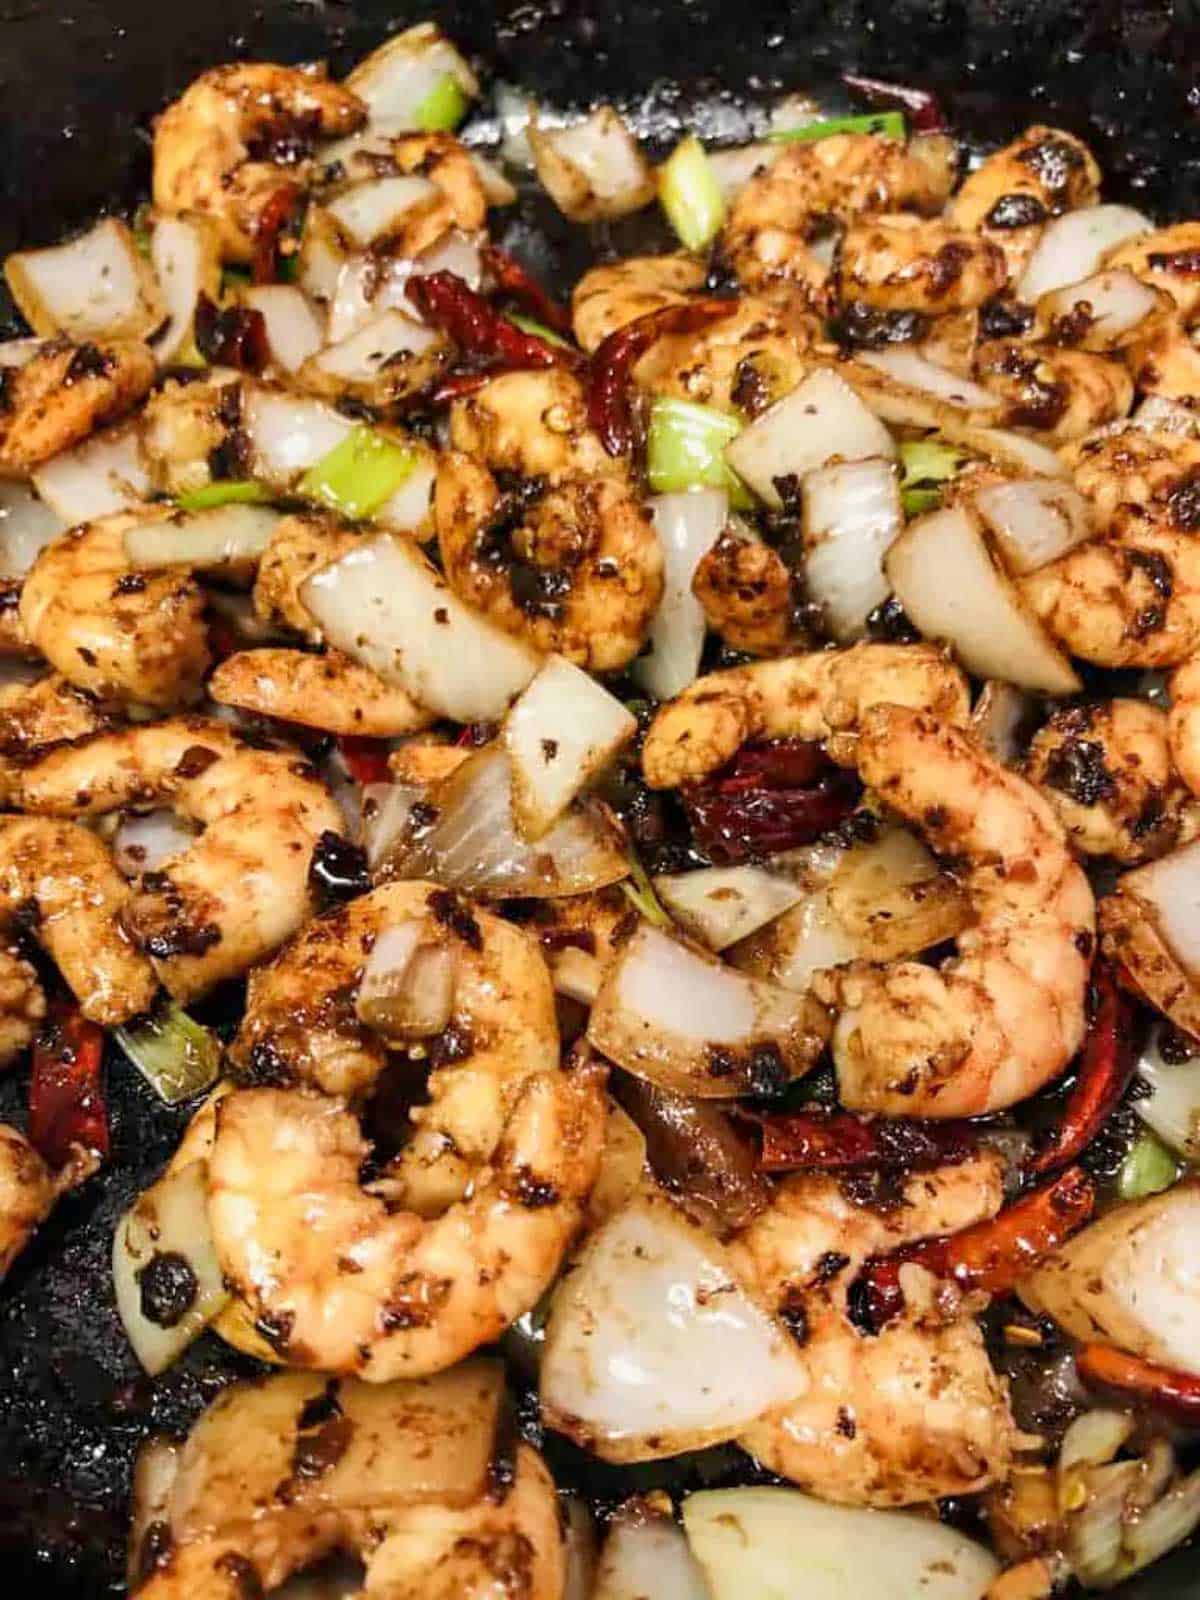 Shrimp With Black Bean Sauce with onions, green onions, and dried red chilies in a cast iron pan.